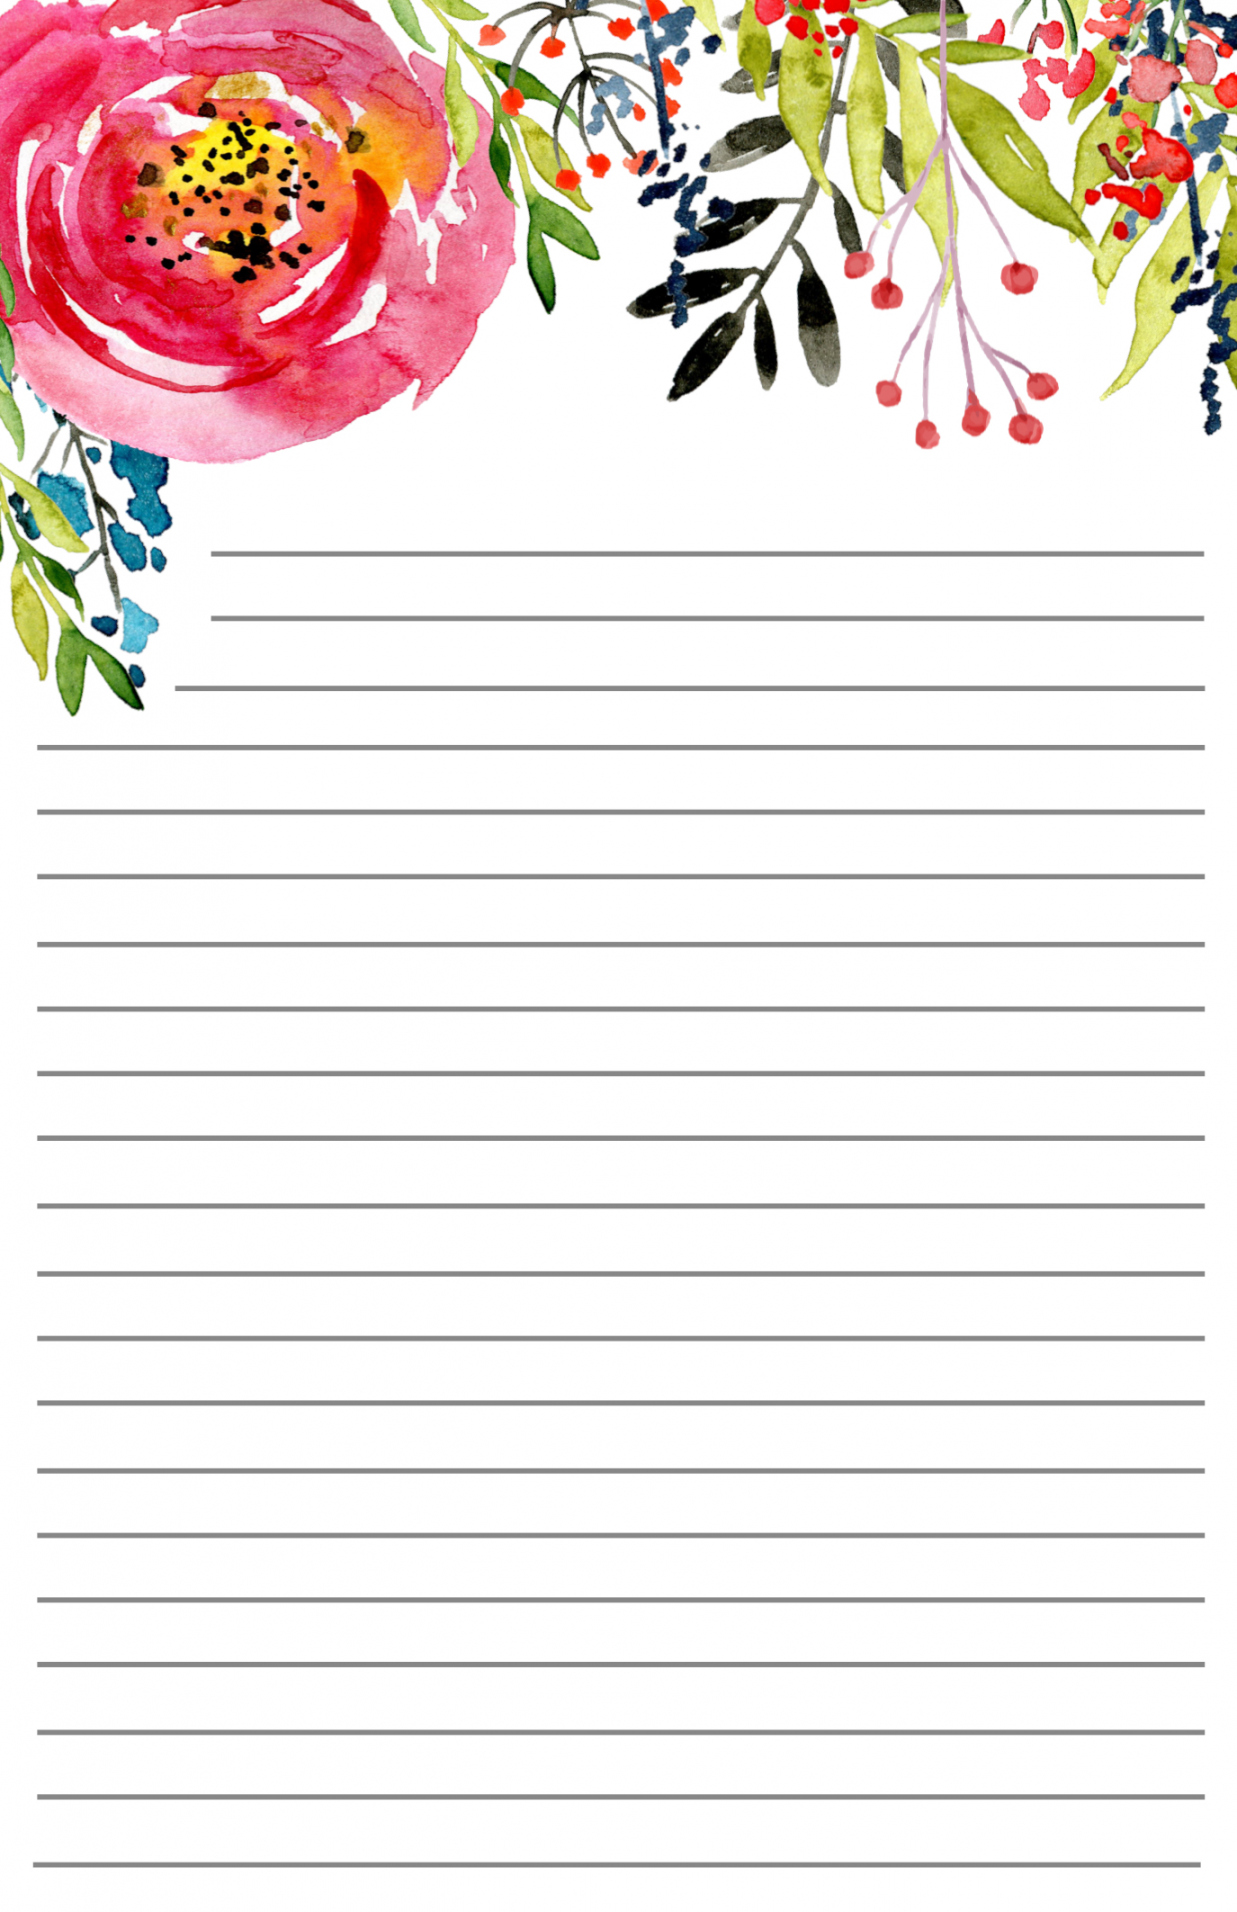 Free Printable Floral Stationery - Paper Trail Design - FREE Printables - Free Printable Stationery